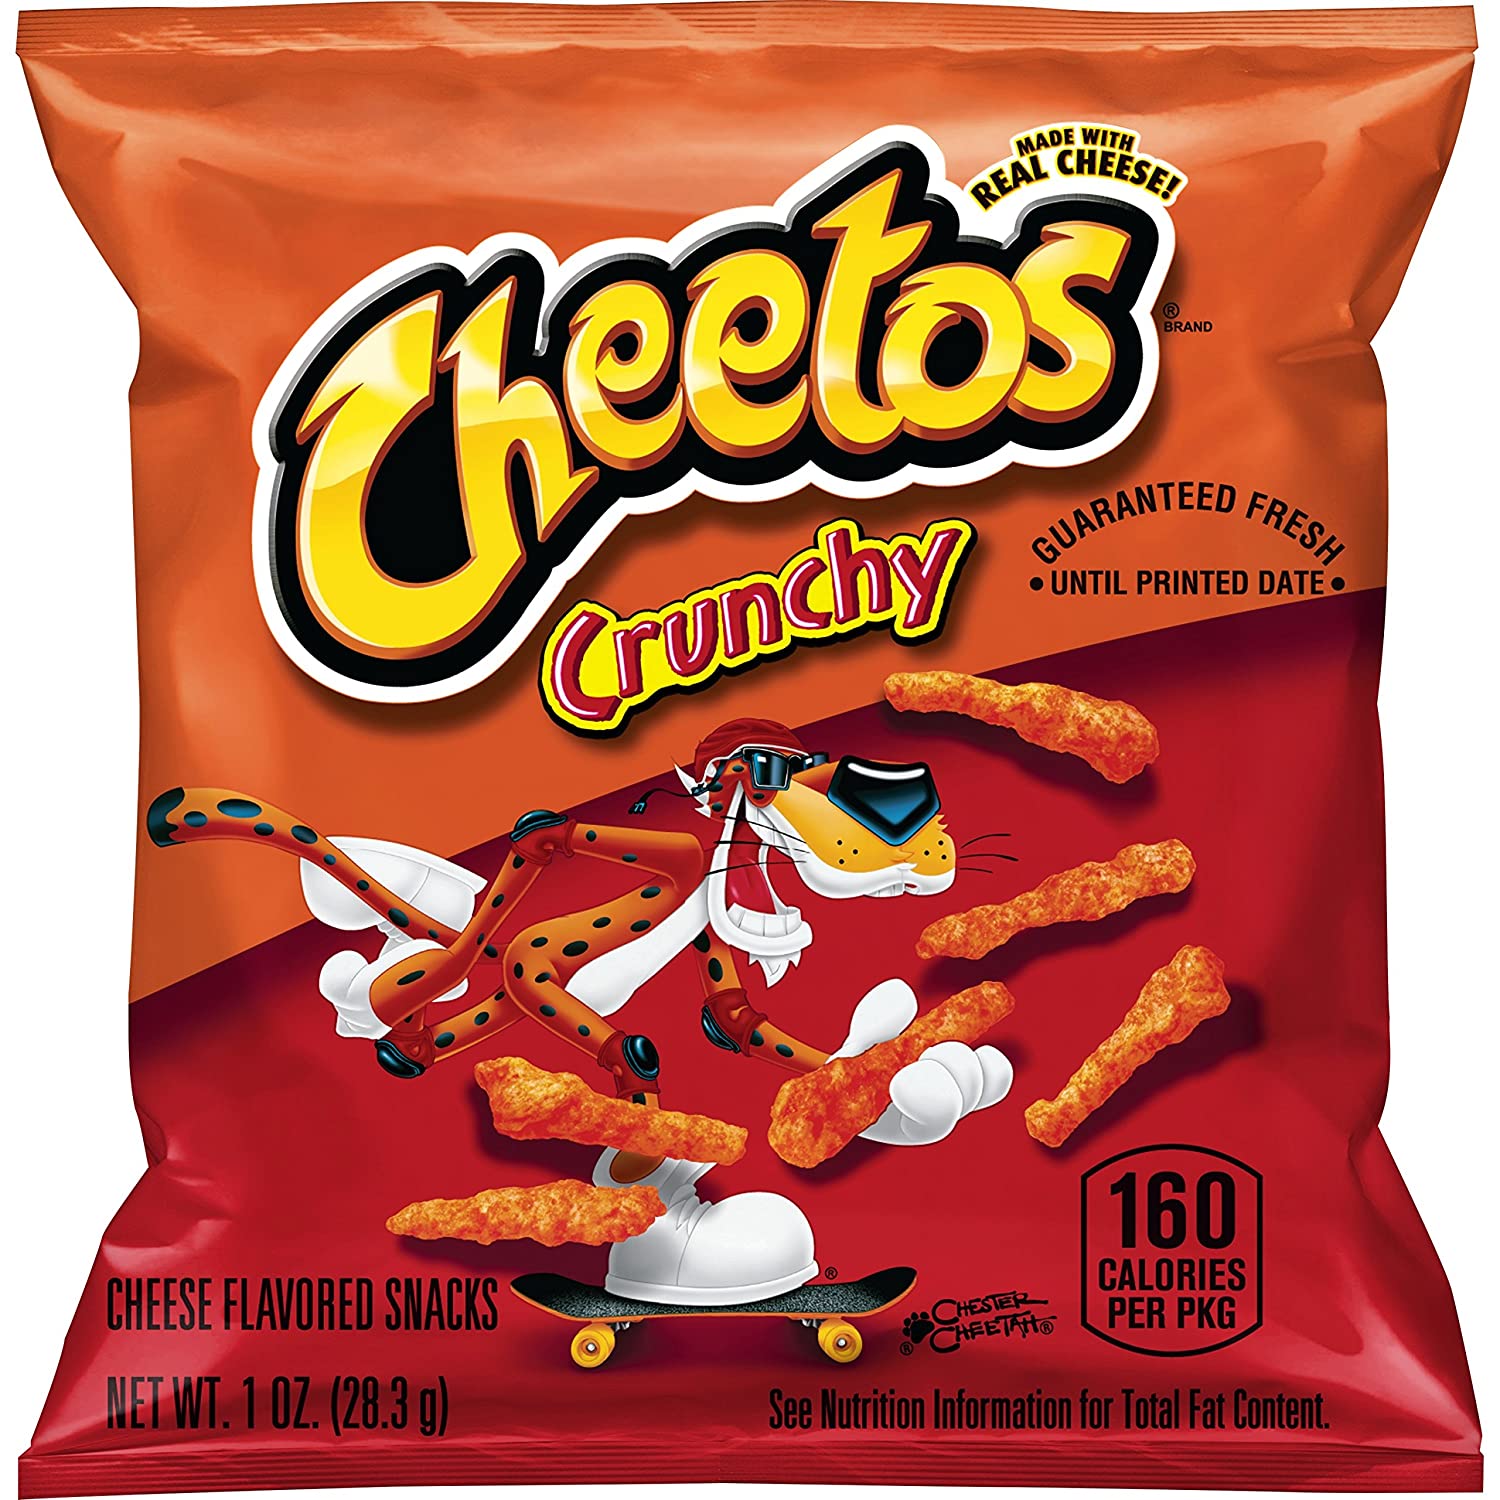 Cheetos Crunchy Flamin' Hot Cheese: A Spicy Twist on a Snack – Pop N' Snax